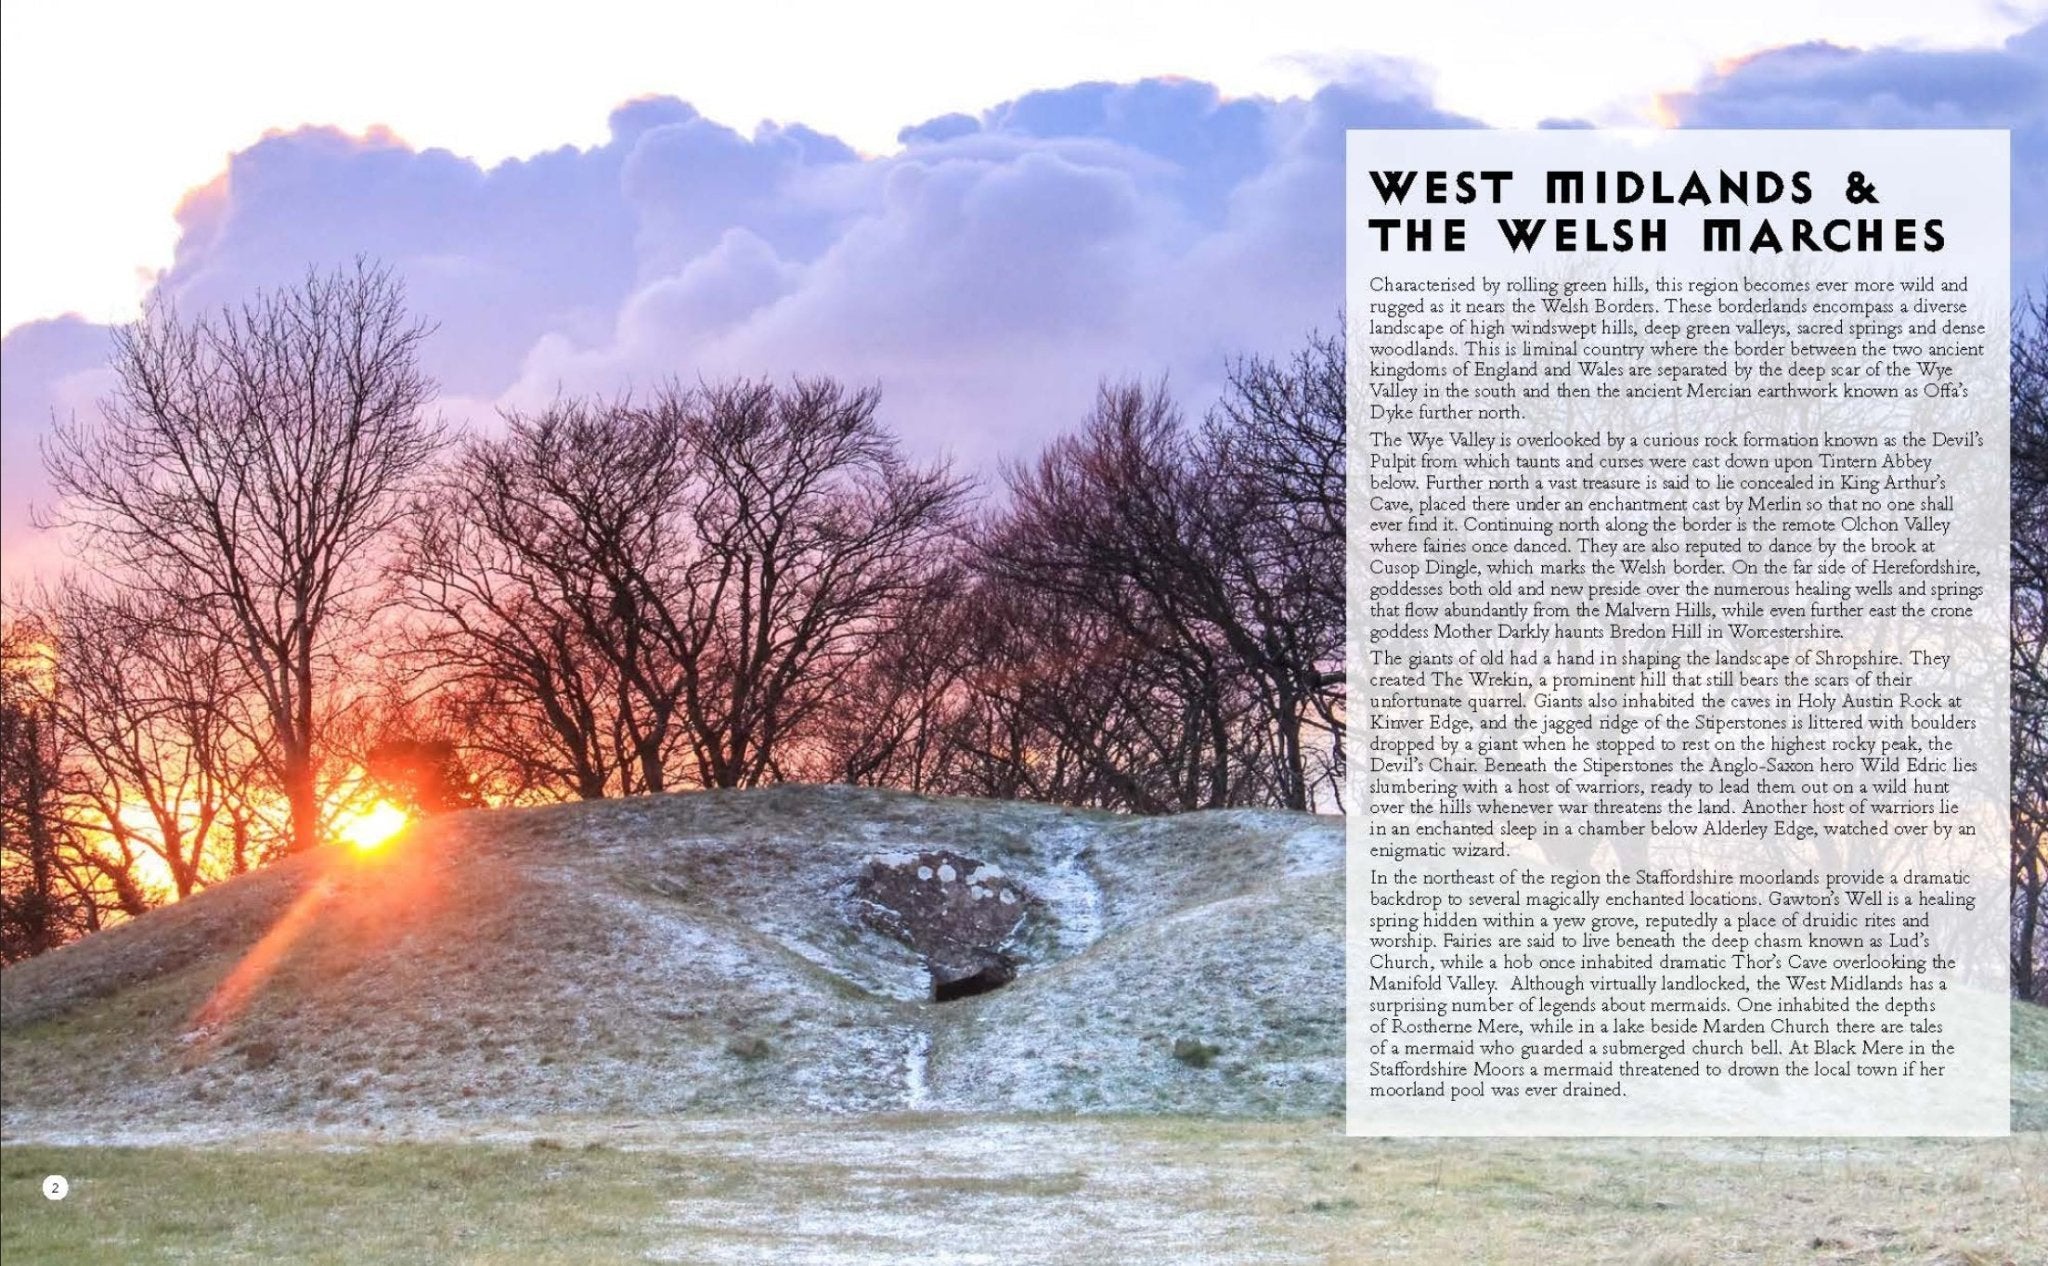 Magical Britain by Rob Wildwood - West Midlands & The Welsh Marshes